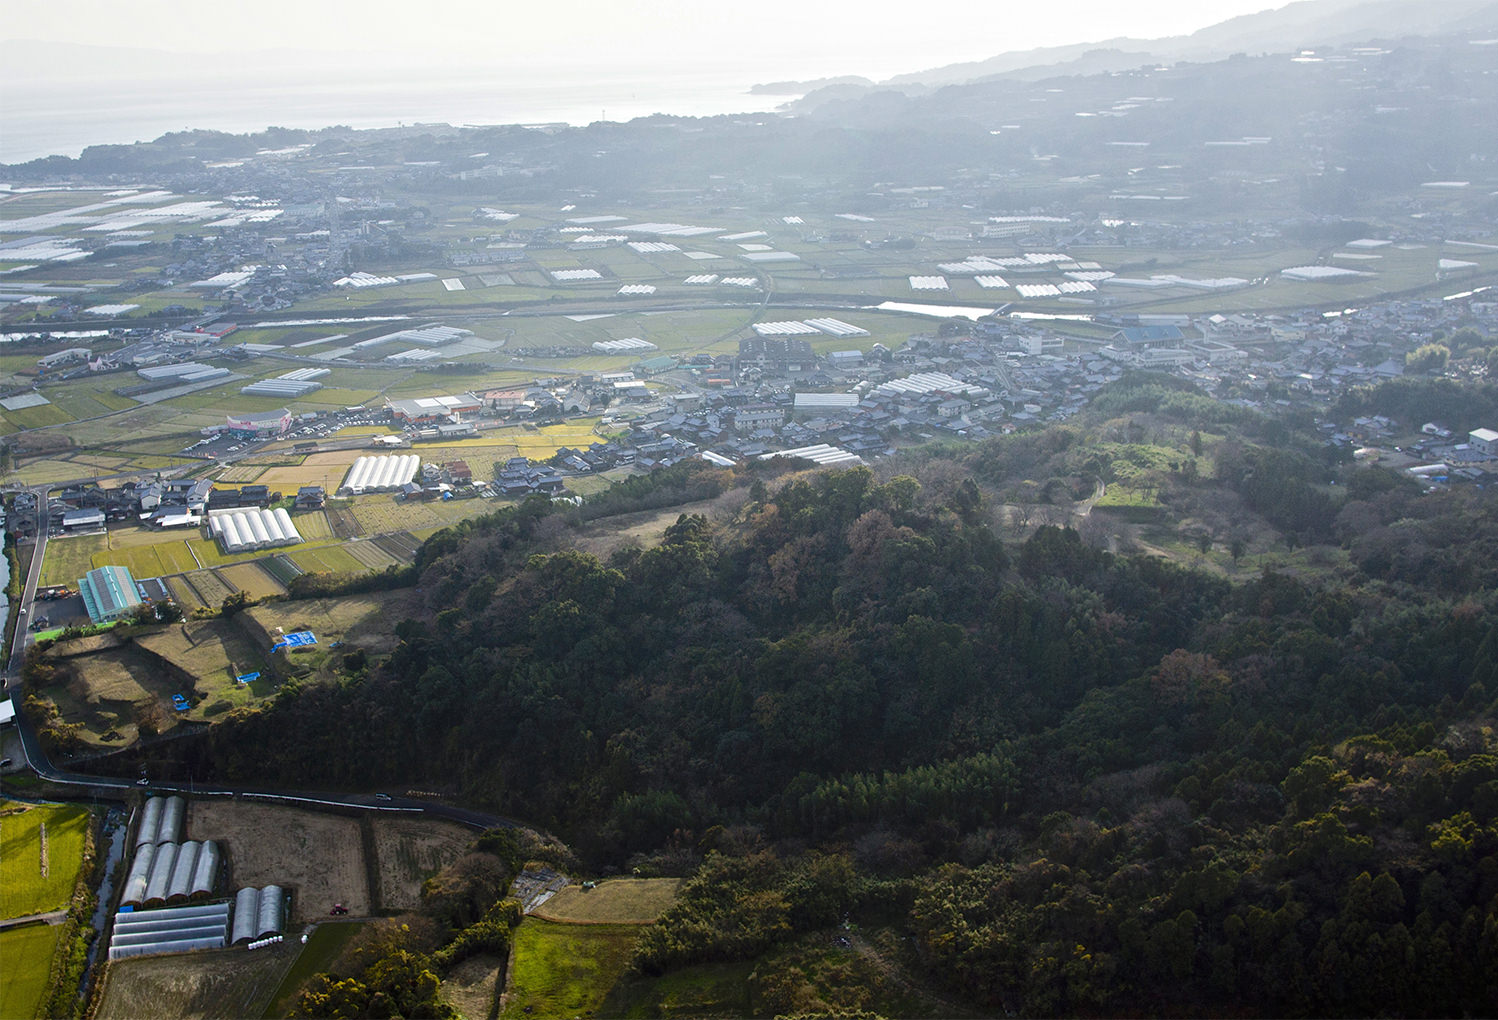 Ruins of Hinoe Castle and the former castle town as seen from above